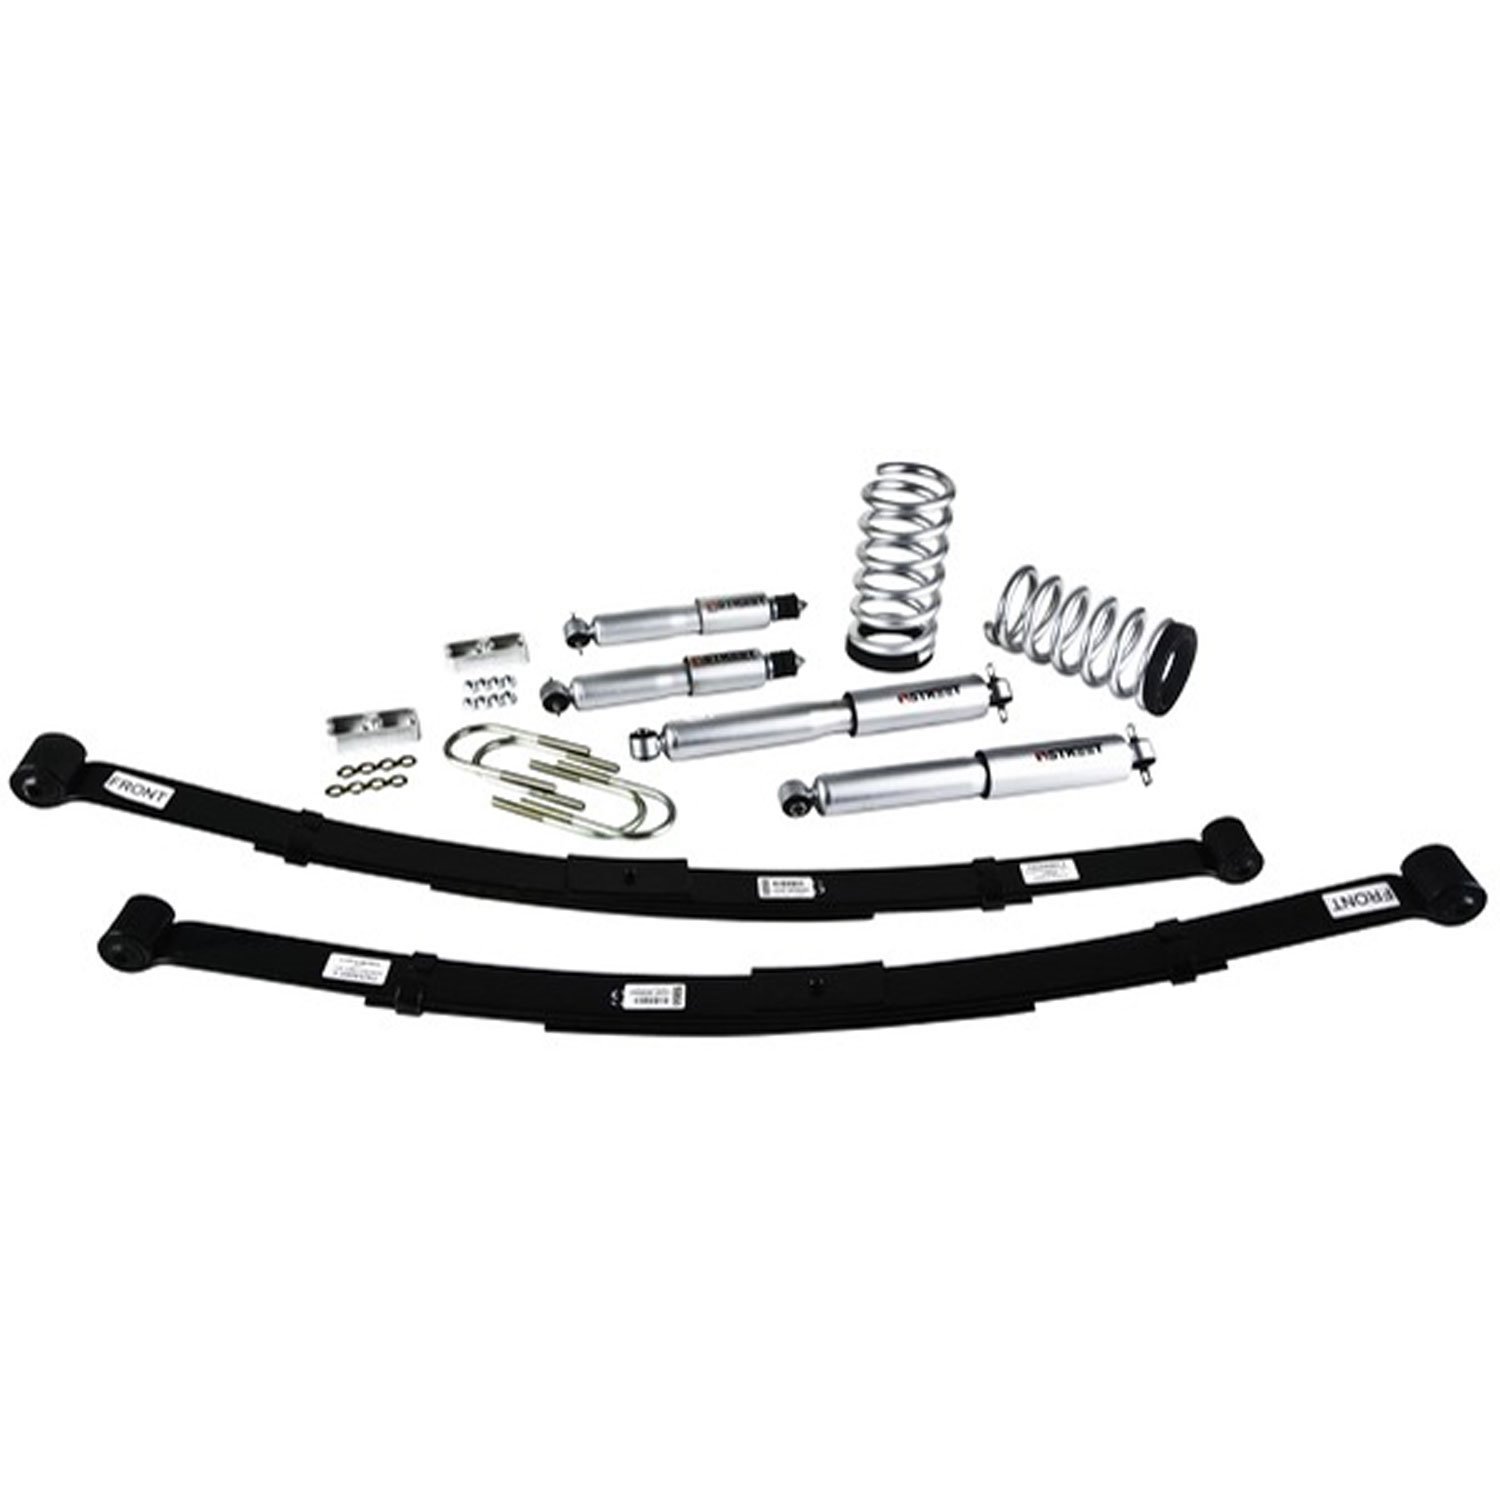 Complete Lowering Kit for 1995-1997 Chevy Blazer/GMC Jimmy